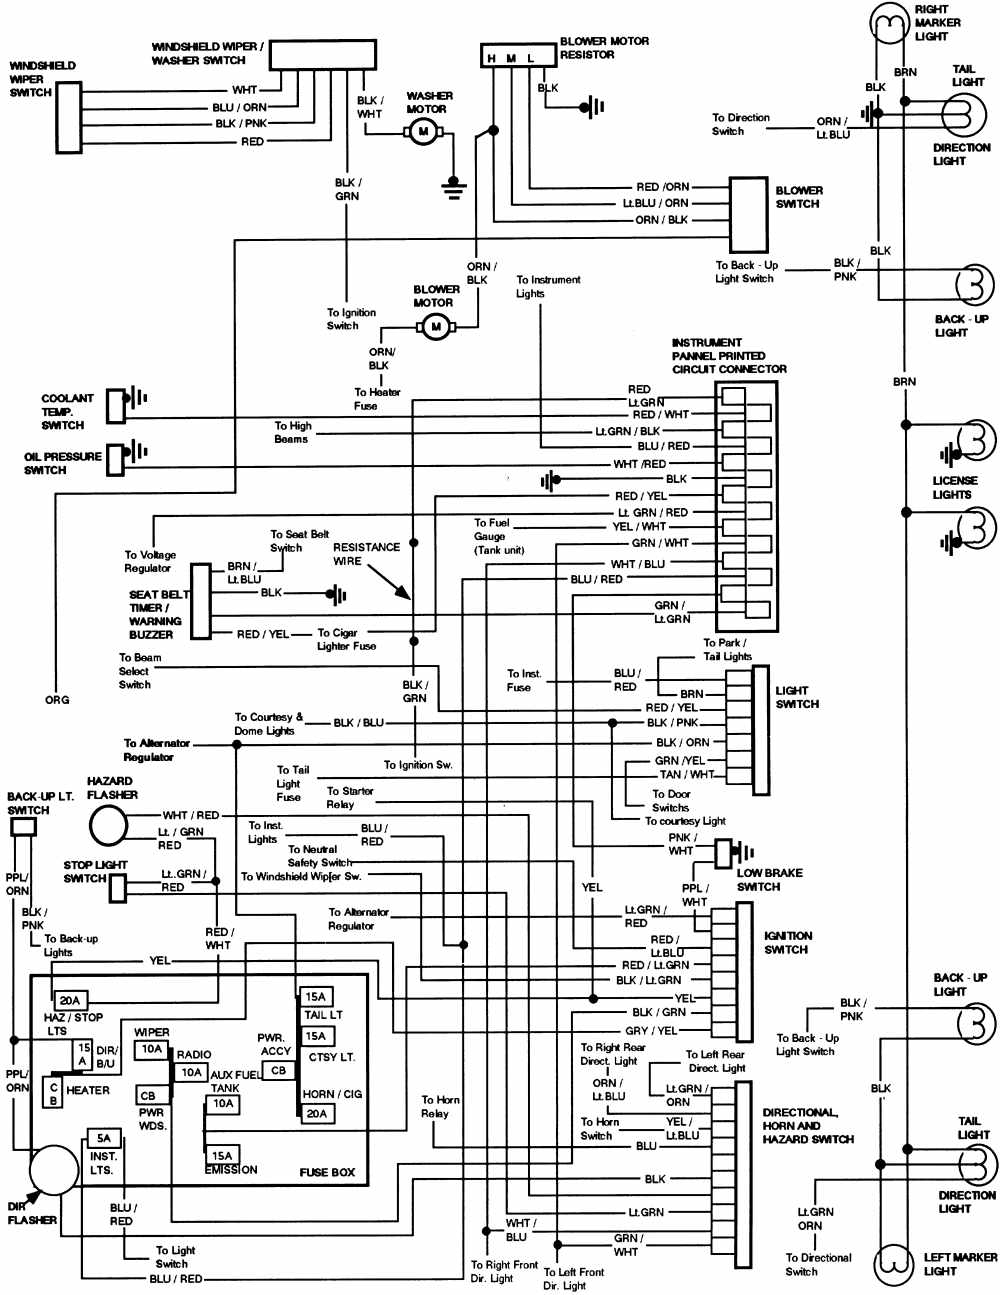 Wiring Diagram For 1984 Ford Bronco Ii